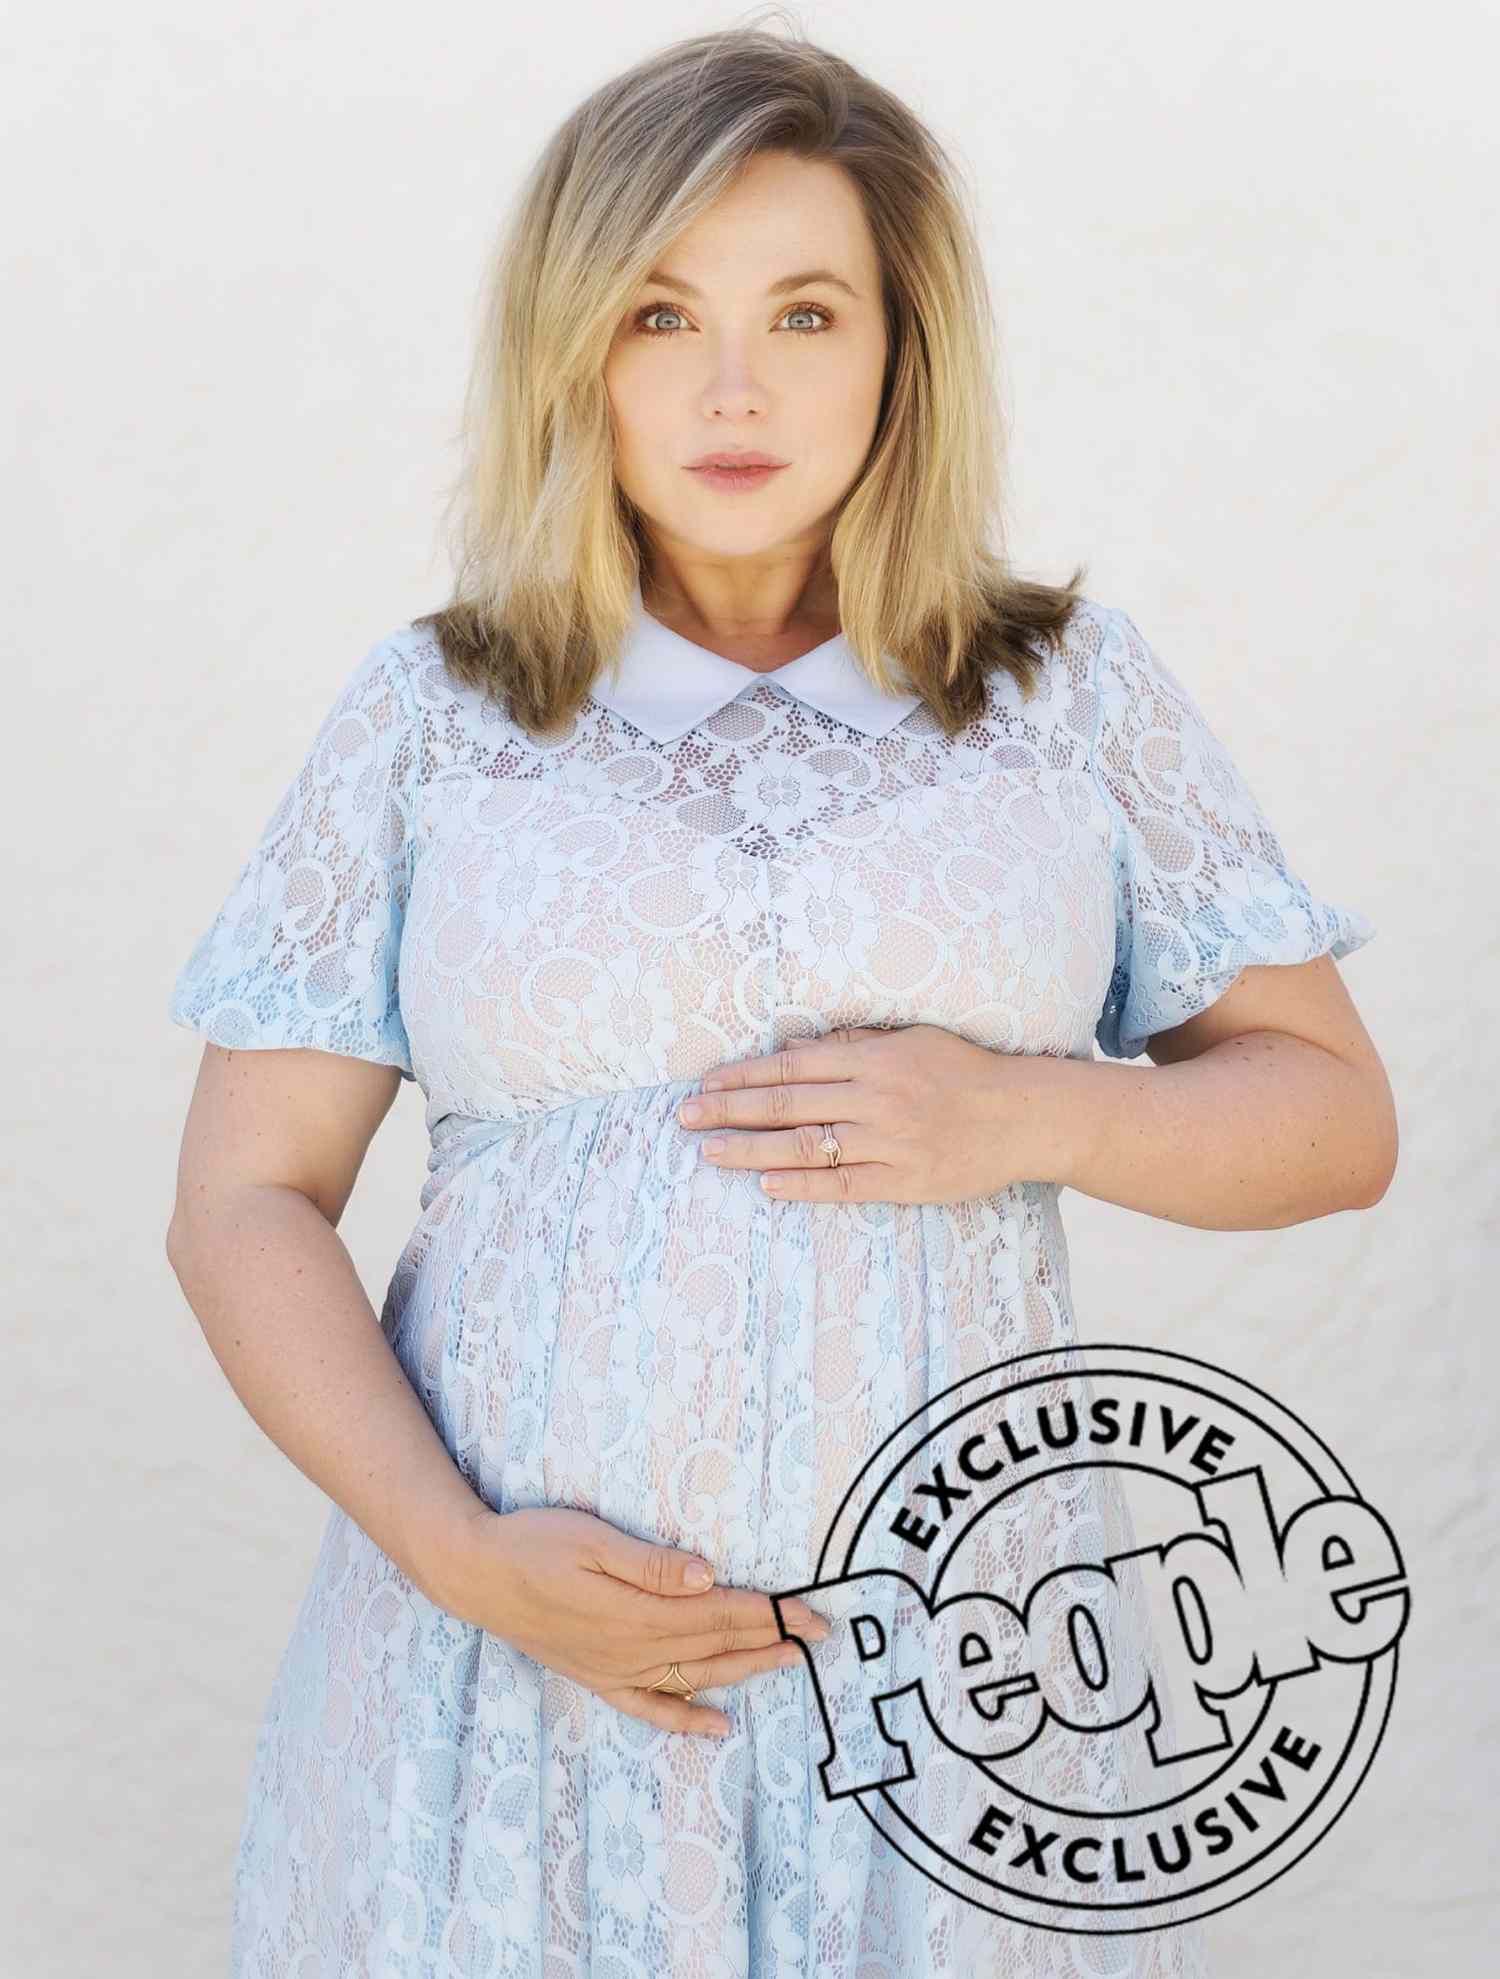 Last Man Standing Star Amanda Fuller Is Pregnant Expecting Son People Com